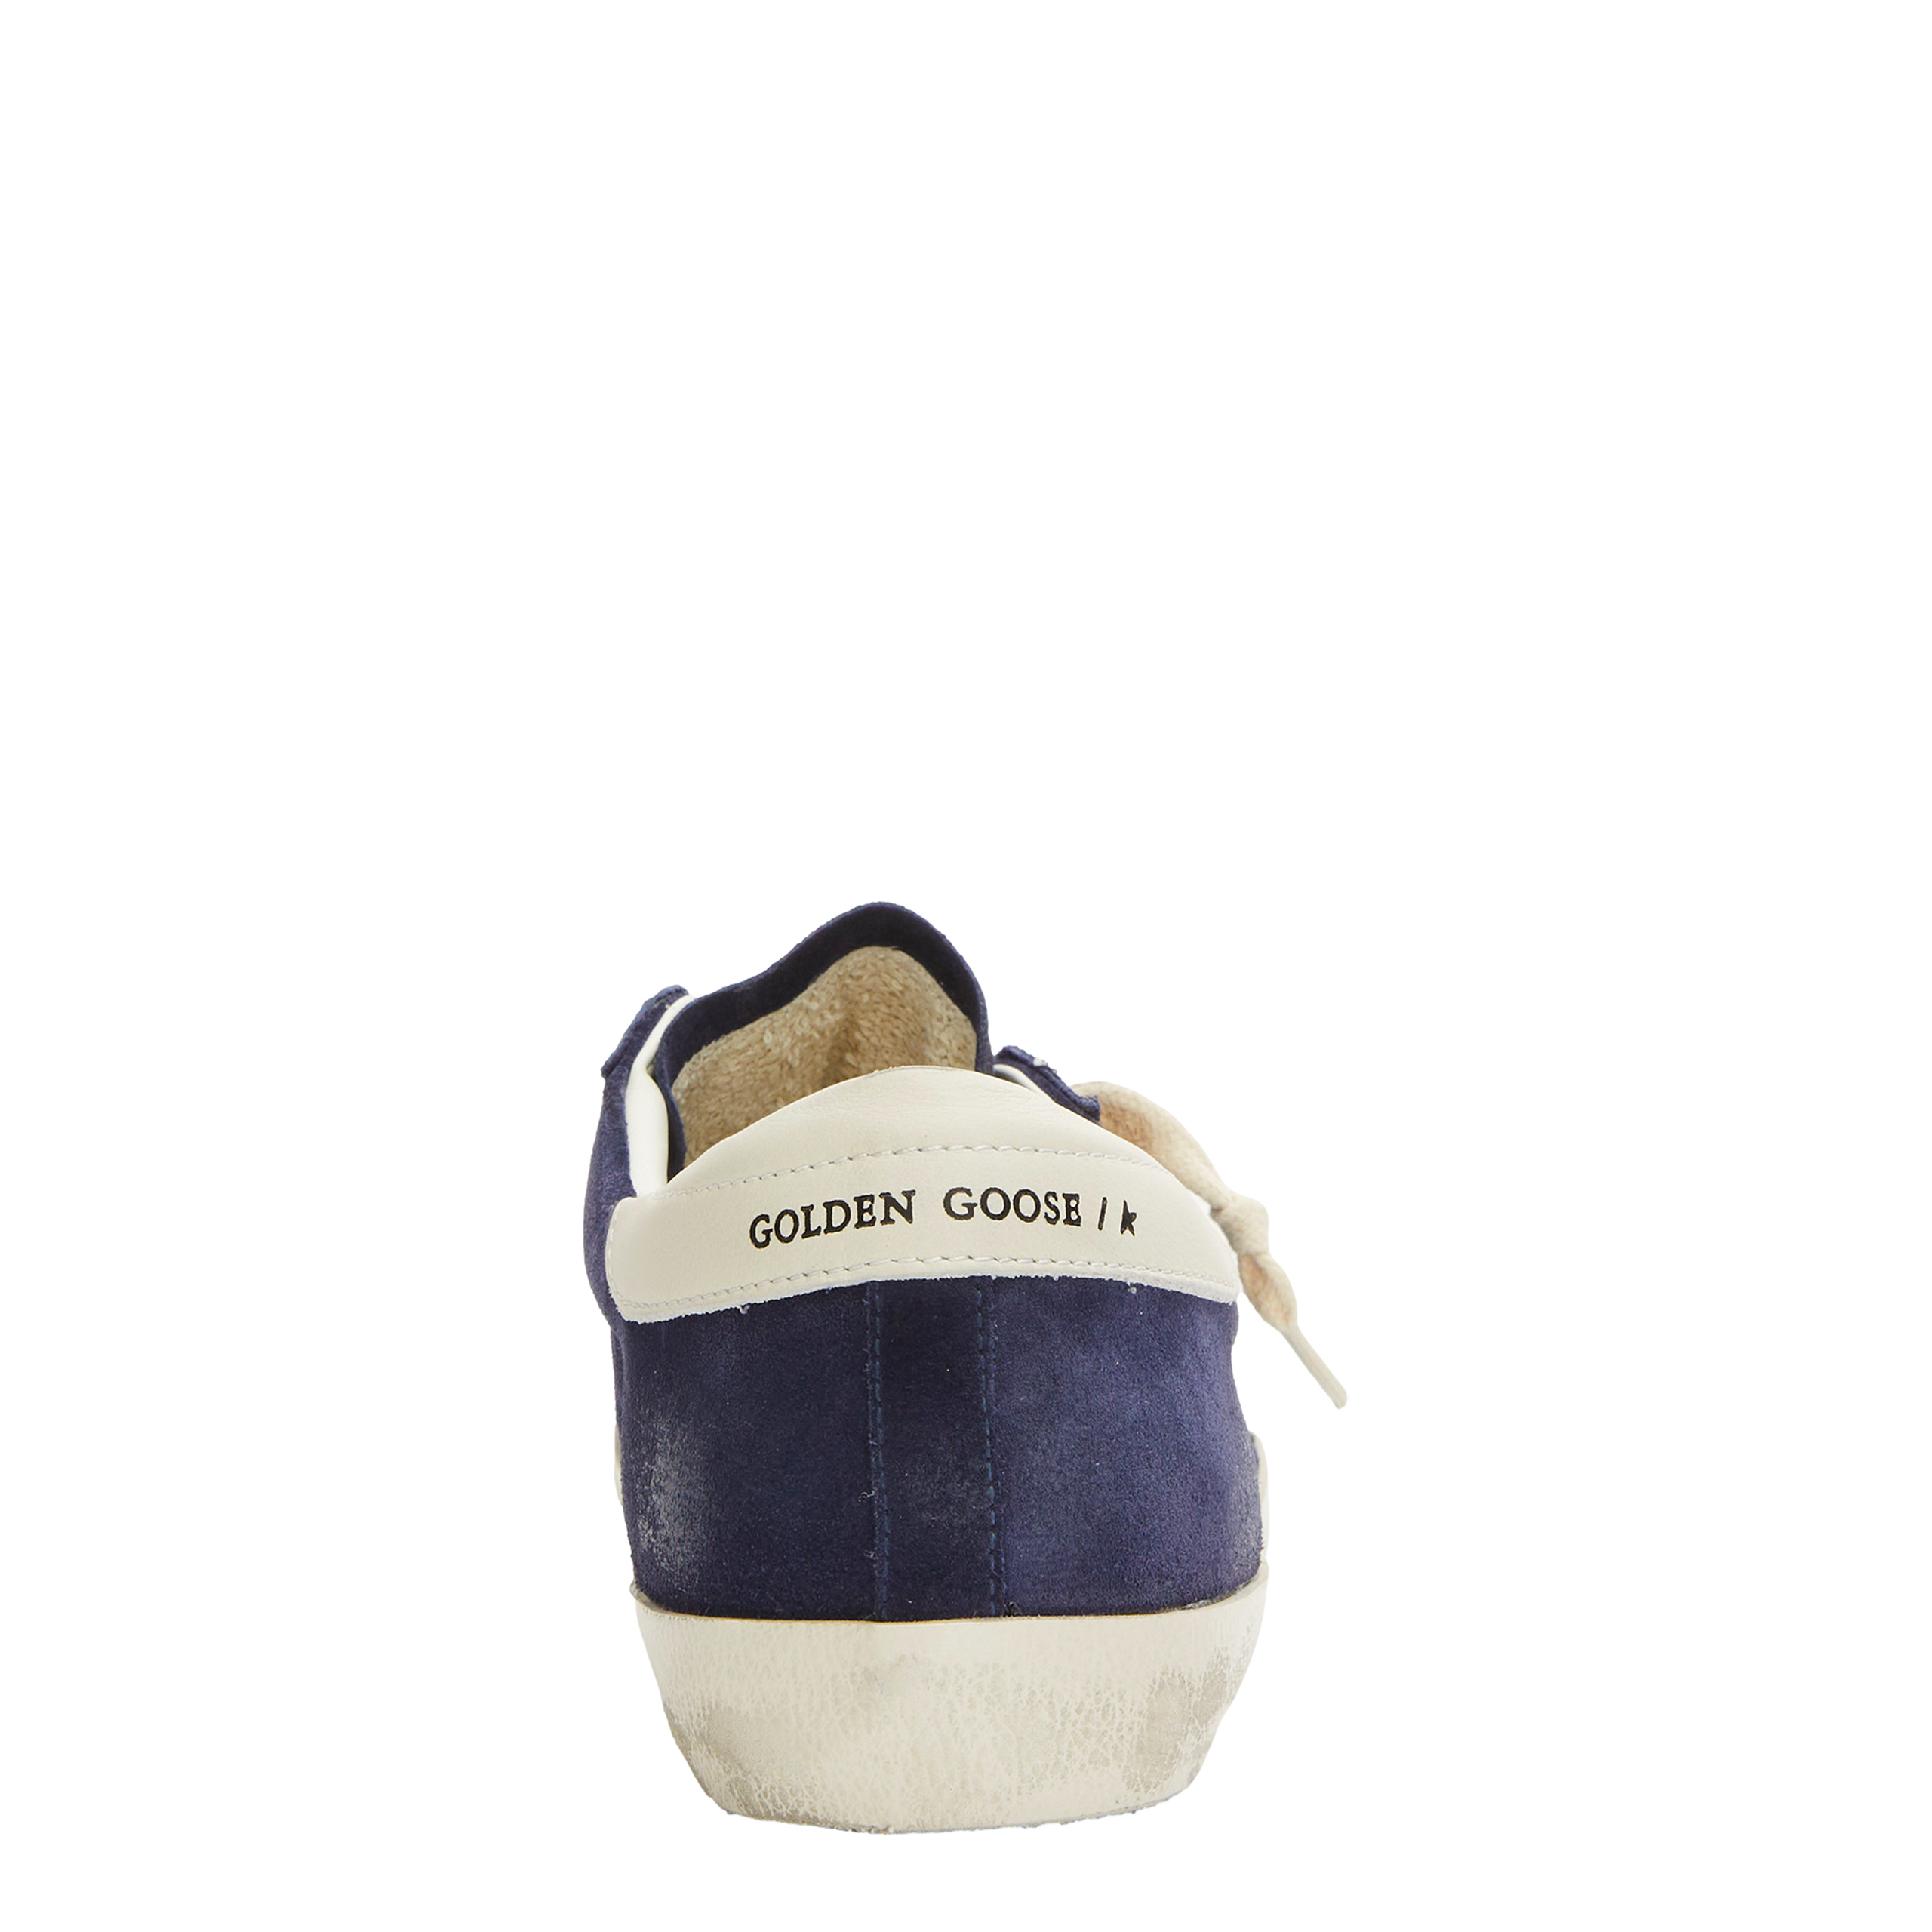 None Golden Goose Deluxe Brand GMF00101/F005529/50669, размер 39;40;41;42;43;44;45;46 GMF00101/F005529/50669 - фото 7